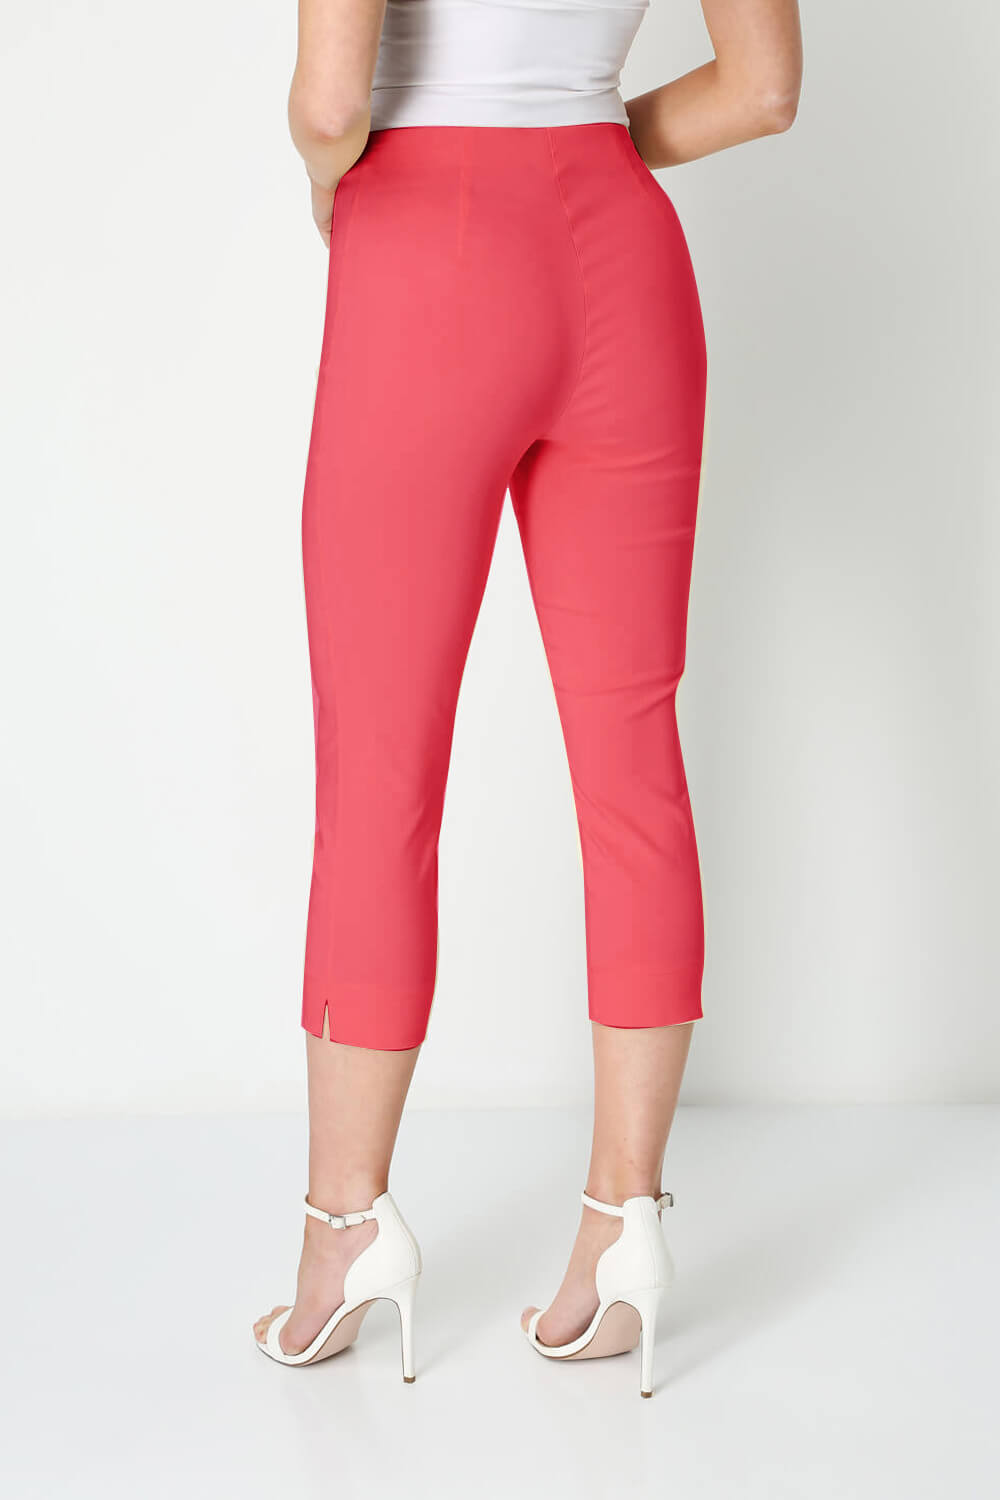 Dark Pink Cropped Stretch Trouser, Image 2 of 6